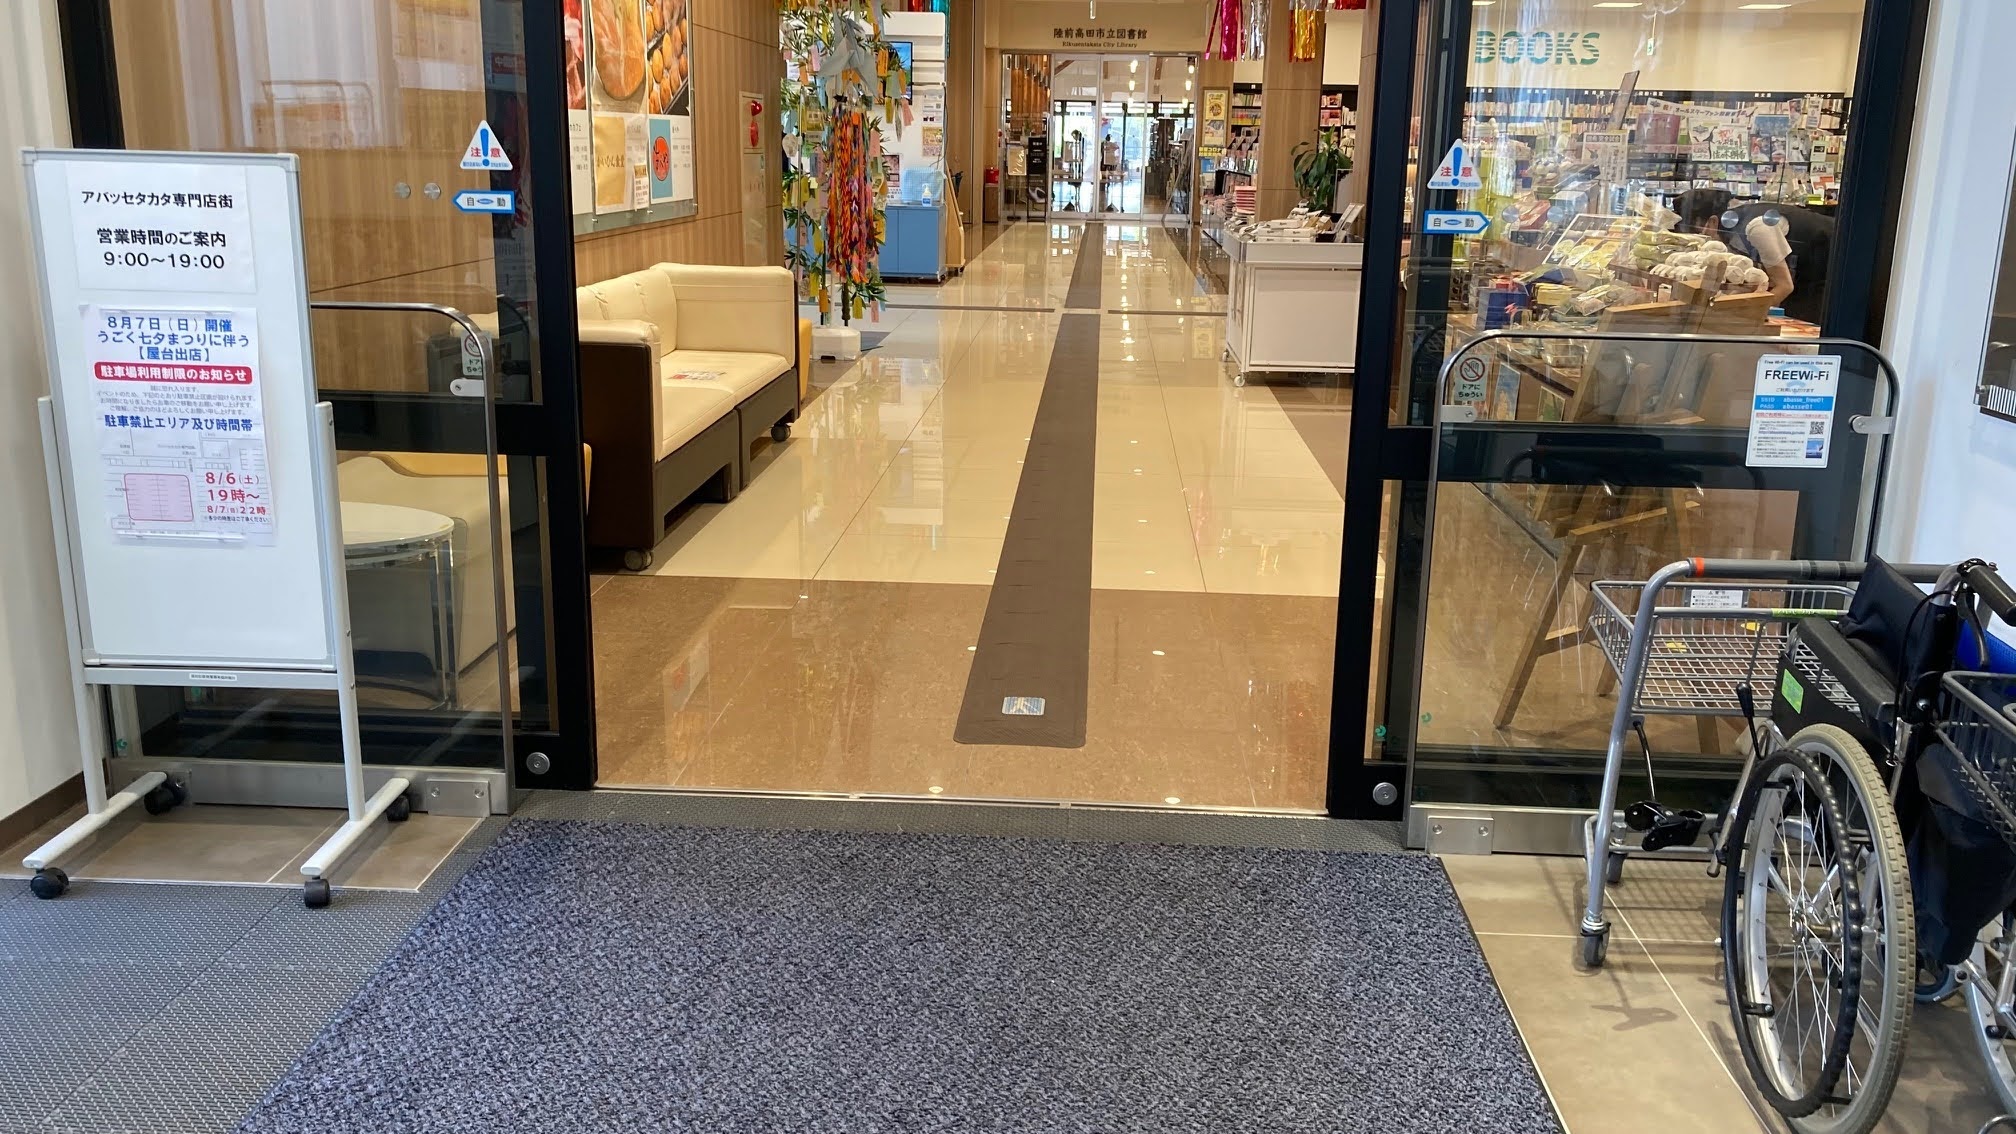 A brown hodokun extends straight from the automatic door at the mall entrance and is used to guide visitors throughout the floor.